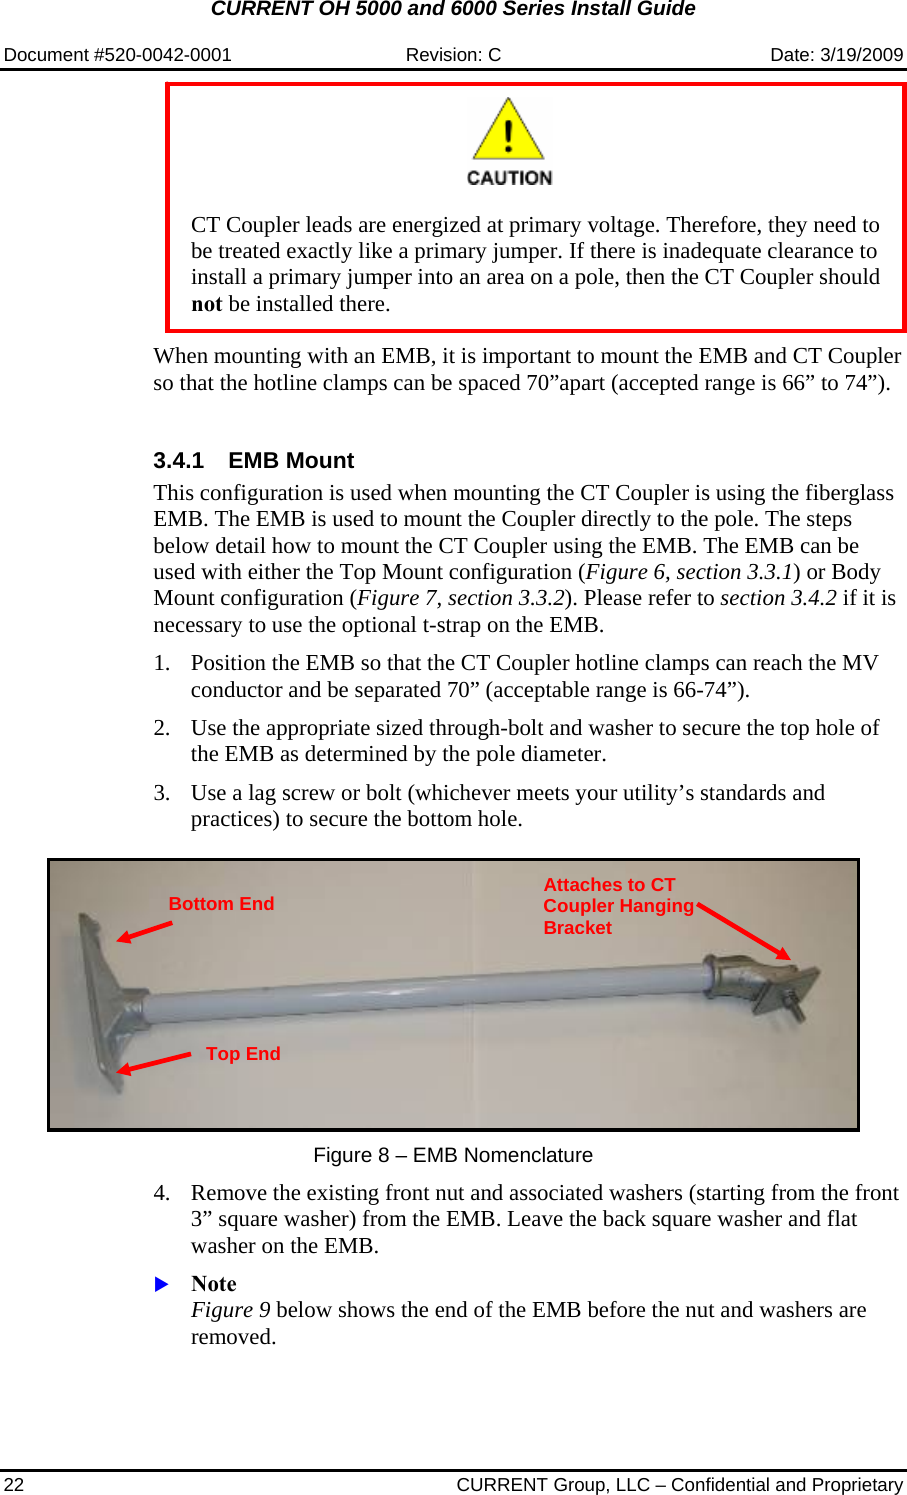 CURRENT OH 5000 and 6000 Series Install Guide  Document #520-0042-0001  Revision: C  Date: 3/19/2009 22  CURRENT Group, LLC – Confidential and Proprietary    CT Coupler leads are energized at primary voltage. Therefore, they need to be treated exactly like a primary jumper. If there is inadequate clearance to install a primary jumper into an area on a pole, then the CT Coupler should not be installed there.  When mounting with an EMB, it is important to mount the EMB and CT Coupler so that the hotline clamps can be spaced 70”apart (accepted range is 66” to 74”).  3.4.1 EMB Mount  This configuration is used when mounting the CT Coupler is using the fiberglass EMB. The EMB is used to mount the Coupler directly to the pole. The steps below detail how to mount the CT Coupler using the EMB. The EMB can be used with either the Top Mount configuration (Figure 6, section 3.3.1) or Body Mount configuration (Figure 7, section 3.3.2). Please refer to section 3.4.2 if it is necessary to use the optional t-strap on the EMB.  1. Position the EMB so that the CT Coupler hotline clamps can reach the MV conductor and be separated 70” (acceptable range is 66-74”).  2. Use the appropriate sized through-bolt and washer to secure the top hole of the EMB as determined by the pole diameter.  3. Use a lag screw or bolt (whichever meets your utility’s standards and practices) to secure the bottom hole.       Figure 8 – EMB Nomenclature  4. Remove the existing front nut and associated washers (starting from the front 3” square washer) from the EMB. Leave the back square washer and flat washer on the EMB.  X Note Figure 9 below shows the end of the EMB before the nut and washers are removed.  Top End Bottom End Attaches to CT Coupler Hanging Bracket